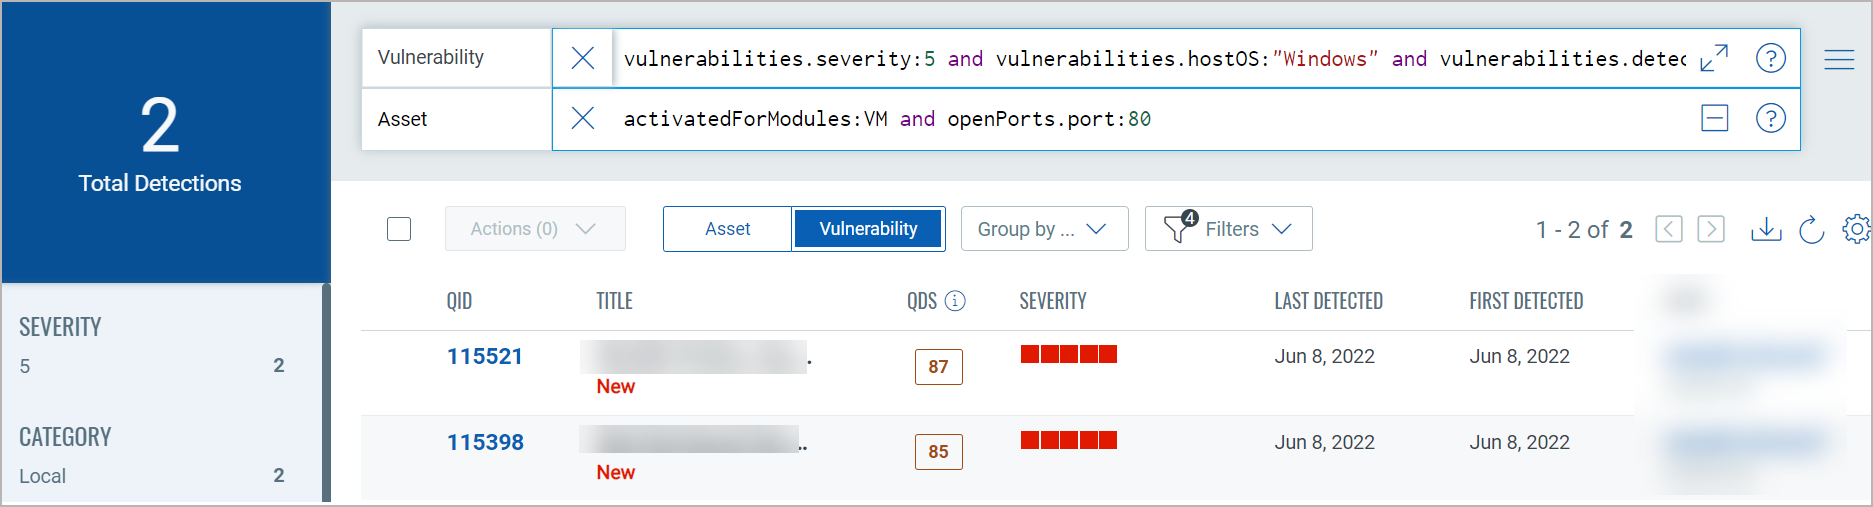 Formation of multiple queries for assets and vulnerabilities.